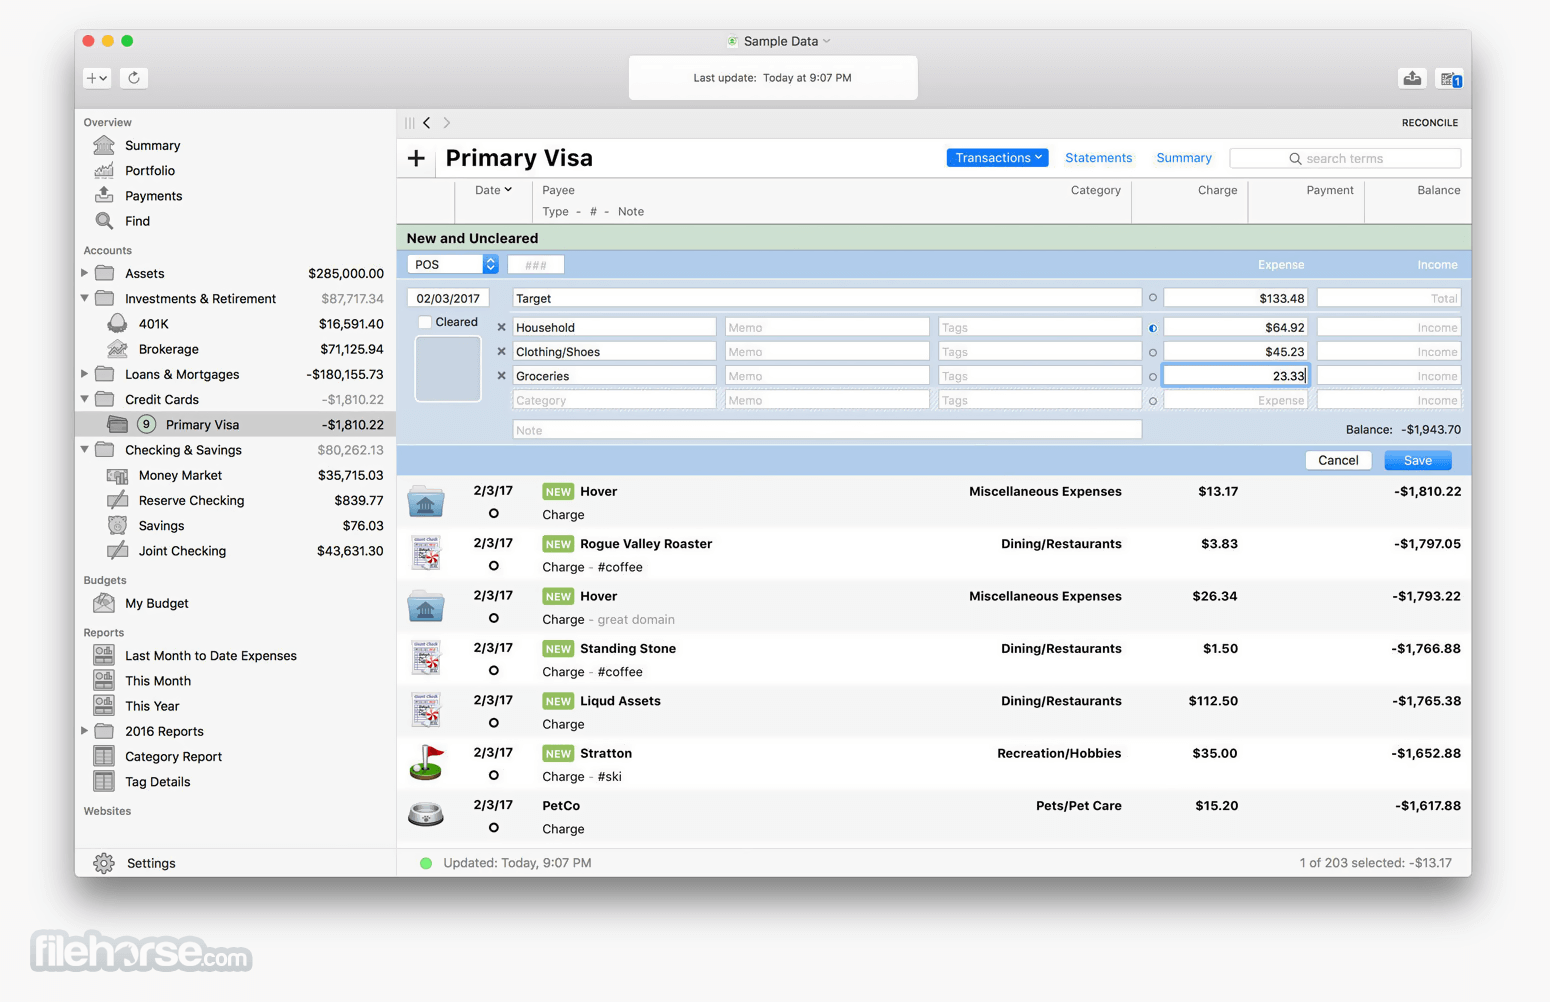 review banktivity for mac